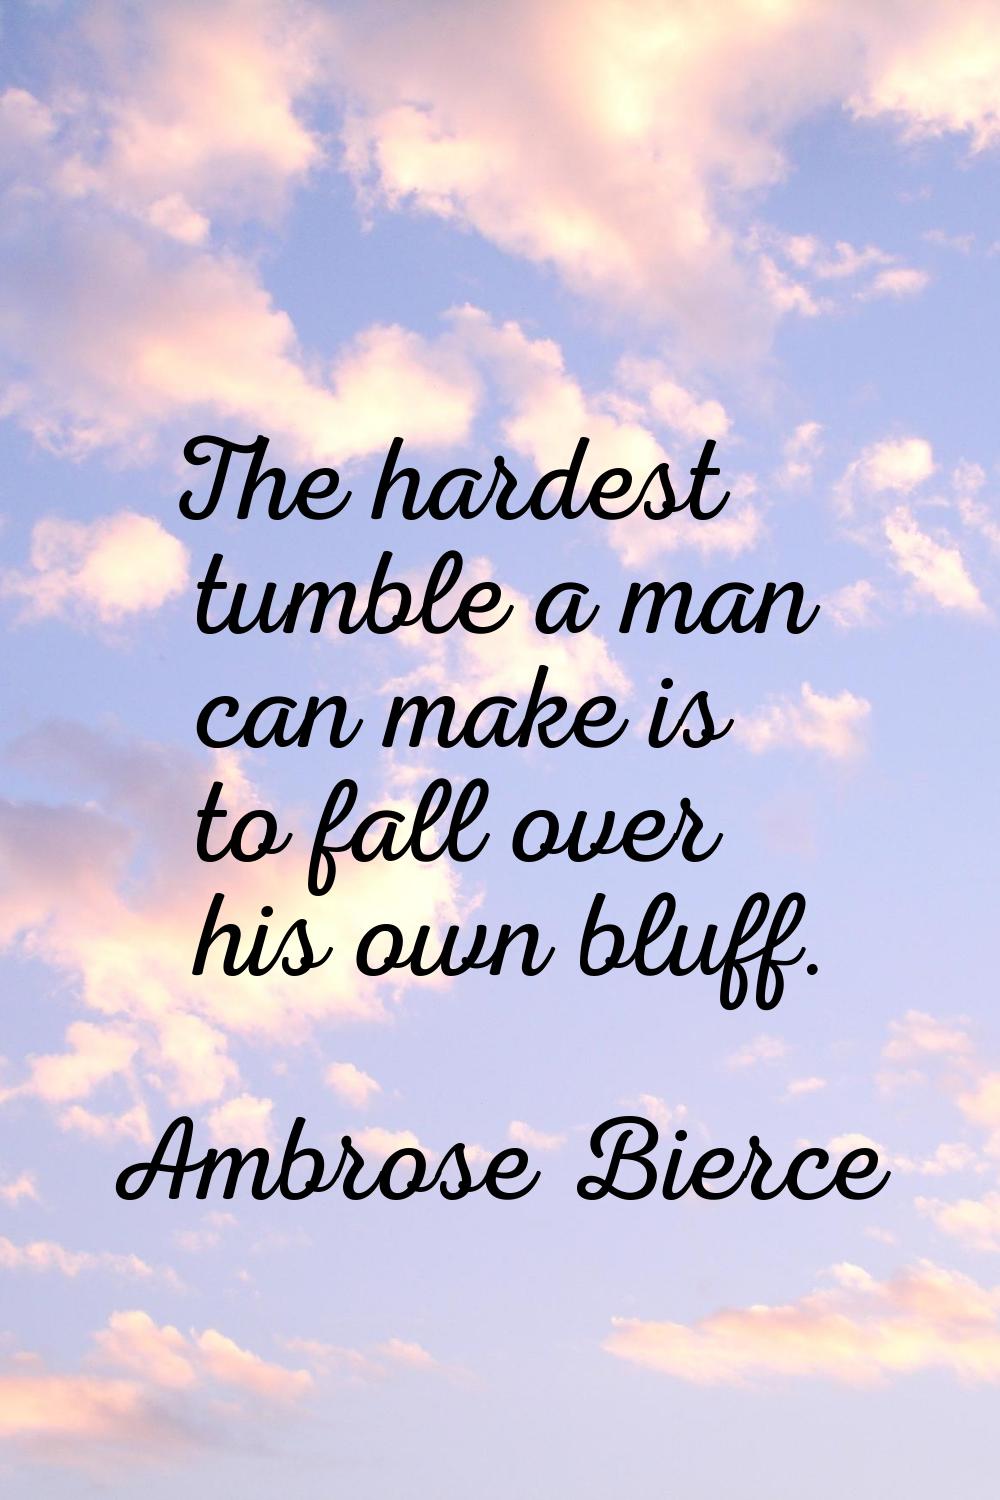 The hardest tumble a man can make is to fall over his own bluff.